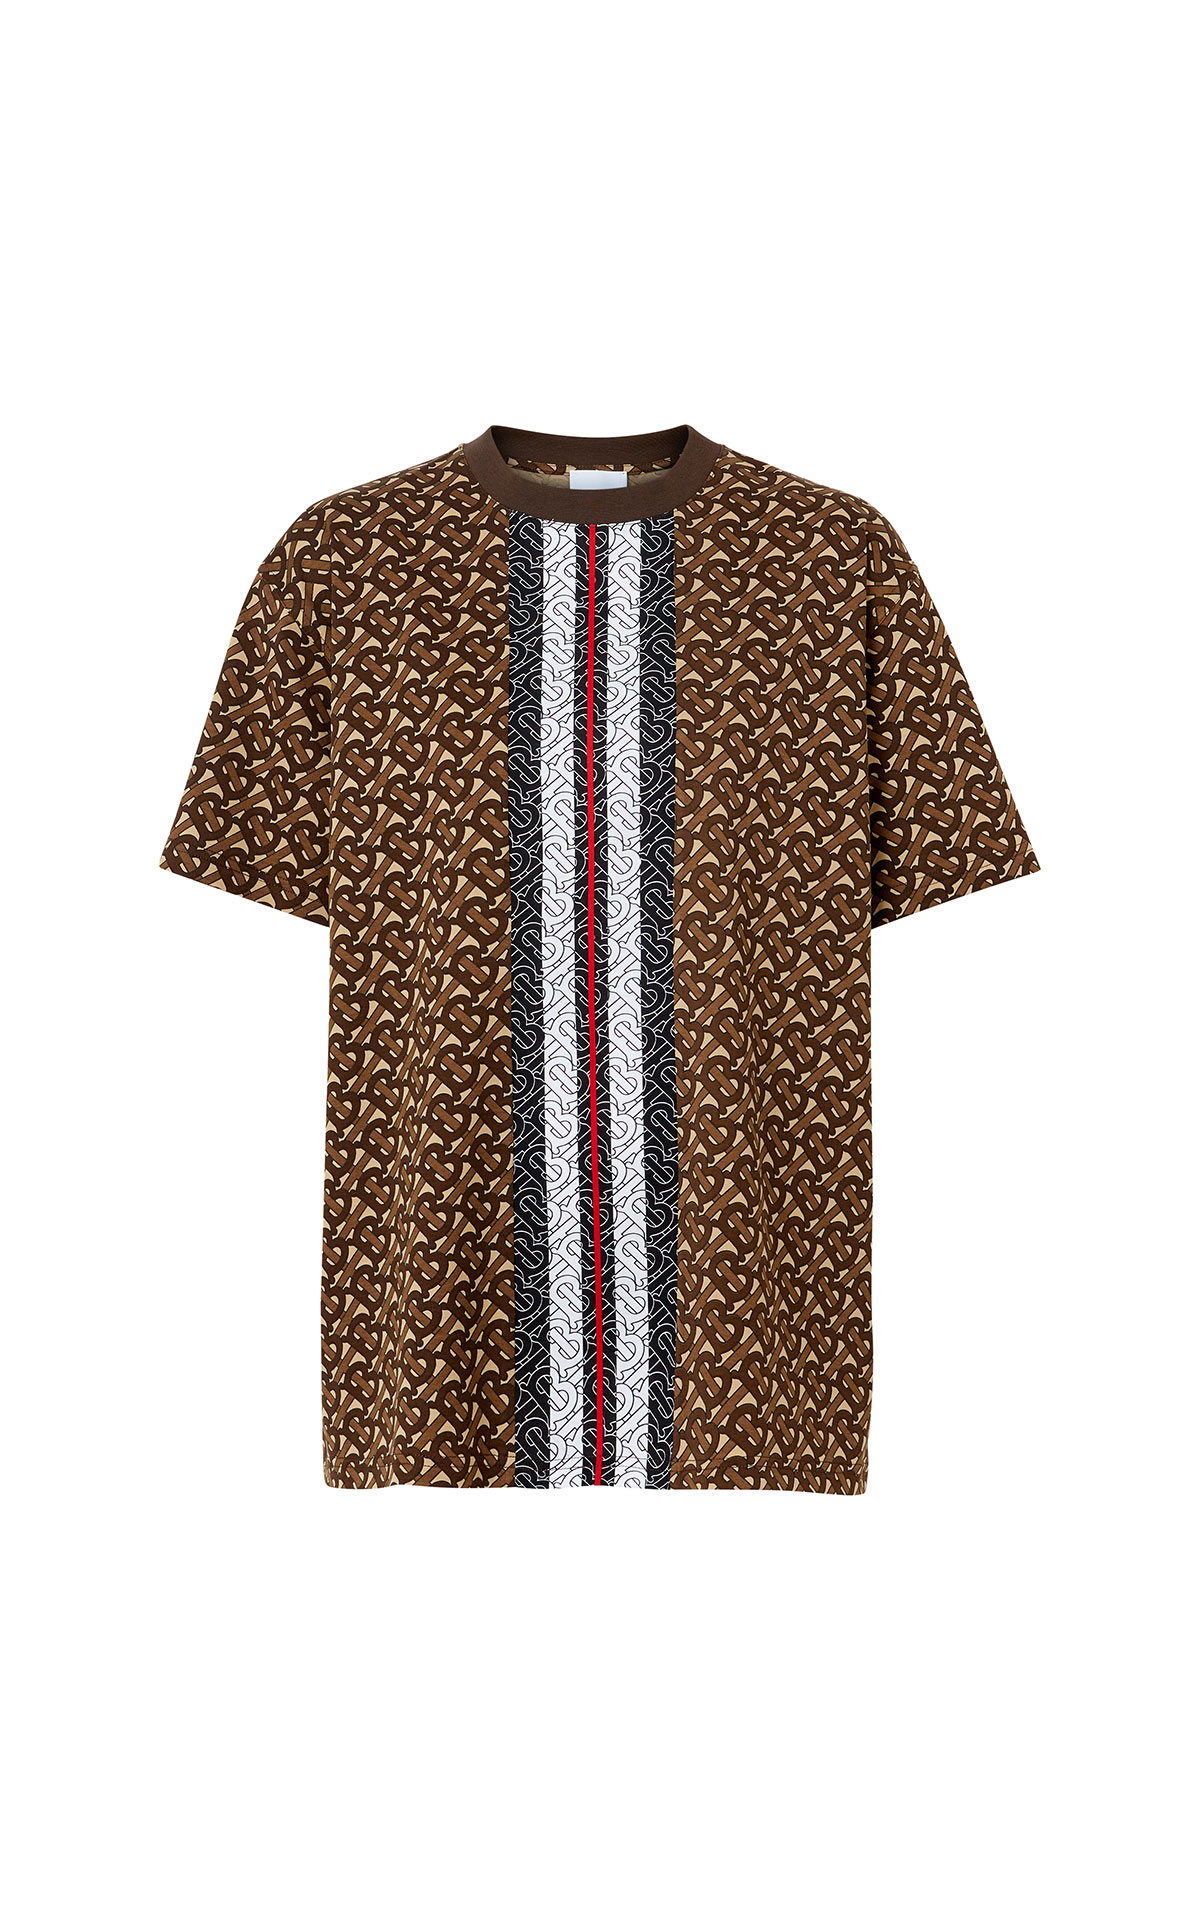 Burberry TB monogram t-shirt in bridle brown from Bicester Village